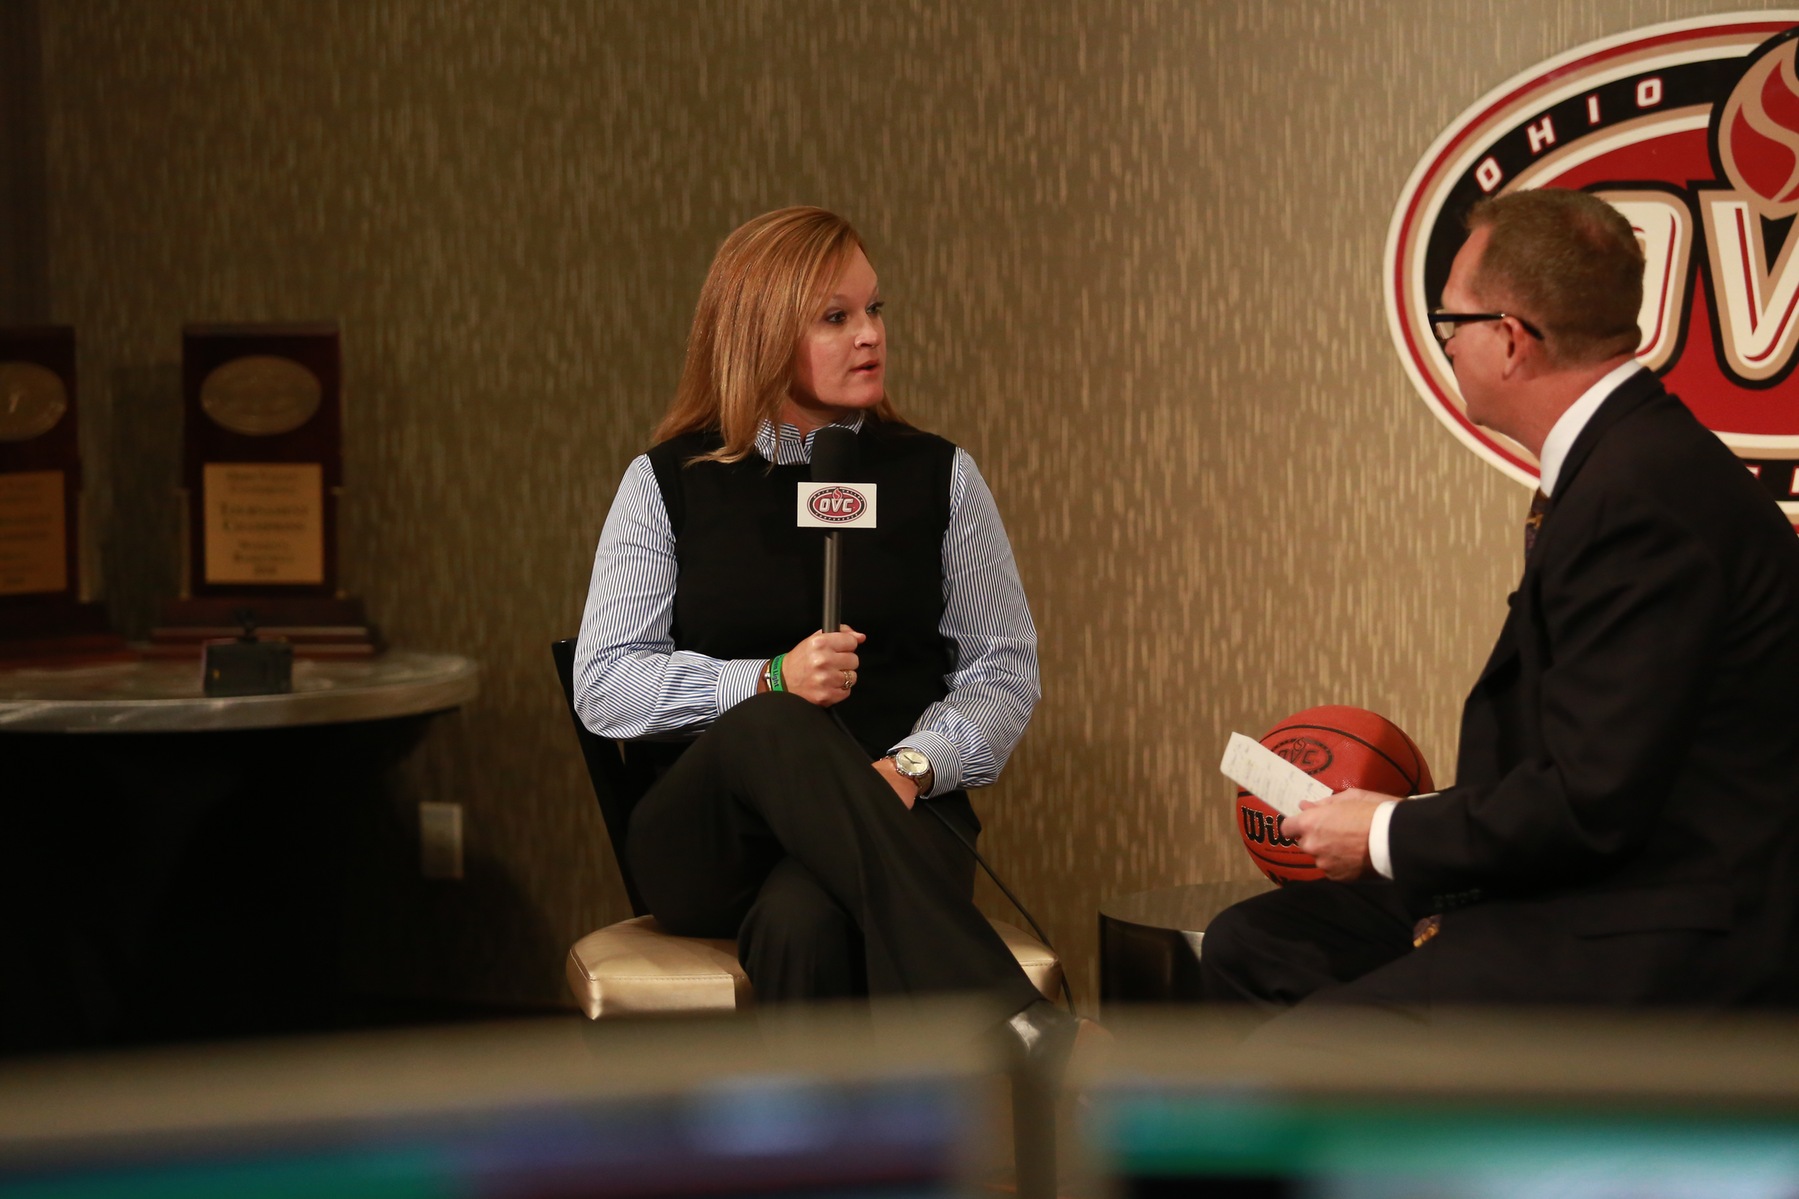 Rosamond appears at OVC Media Day to preview upcoming season